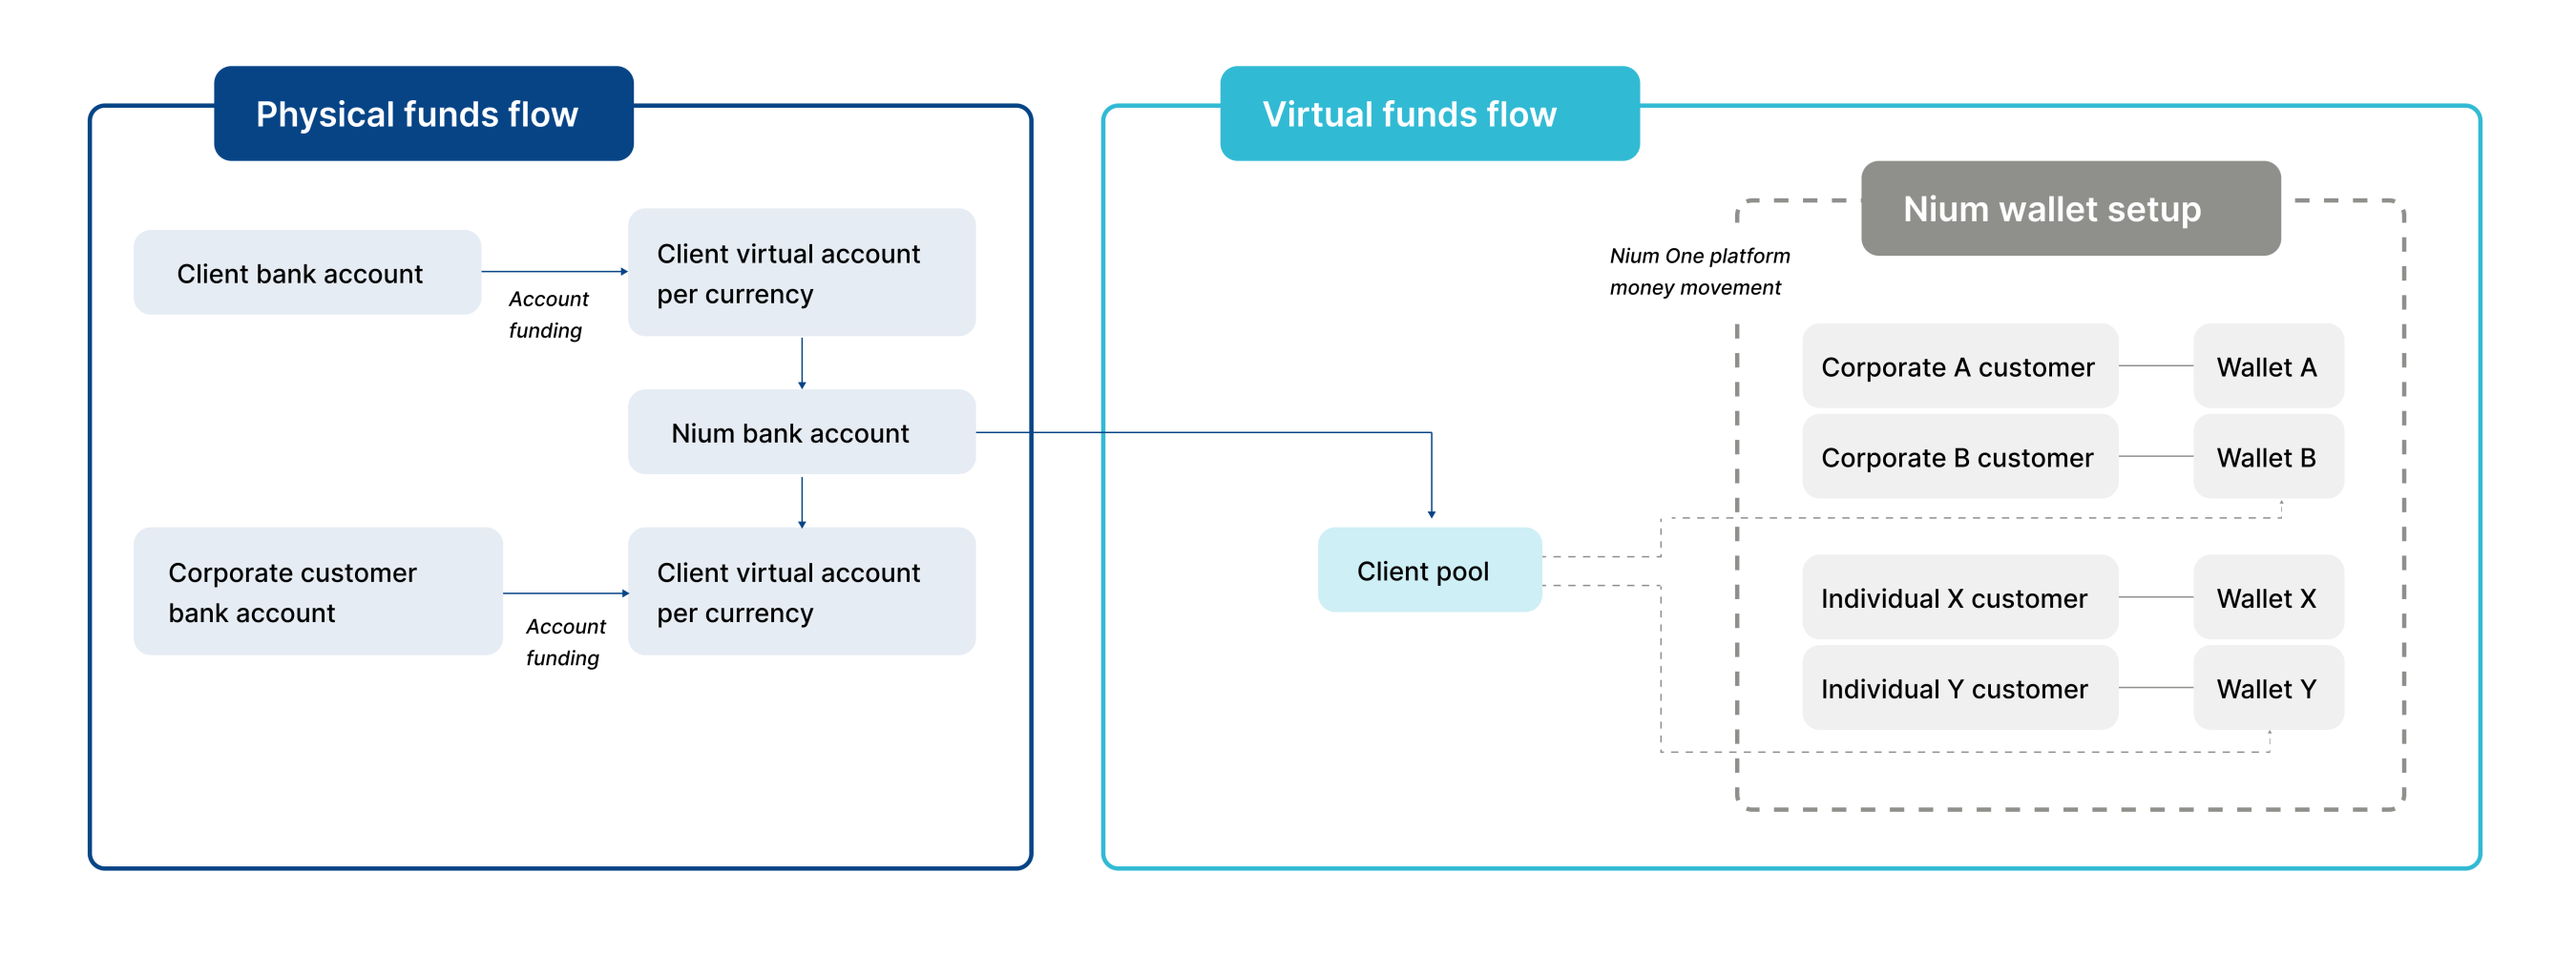 A diagram showing the Hosted Model funds flow.